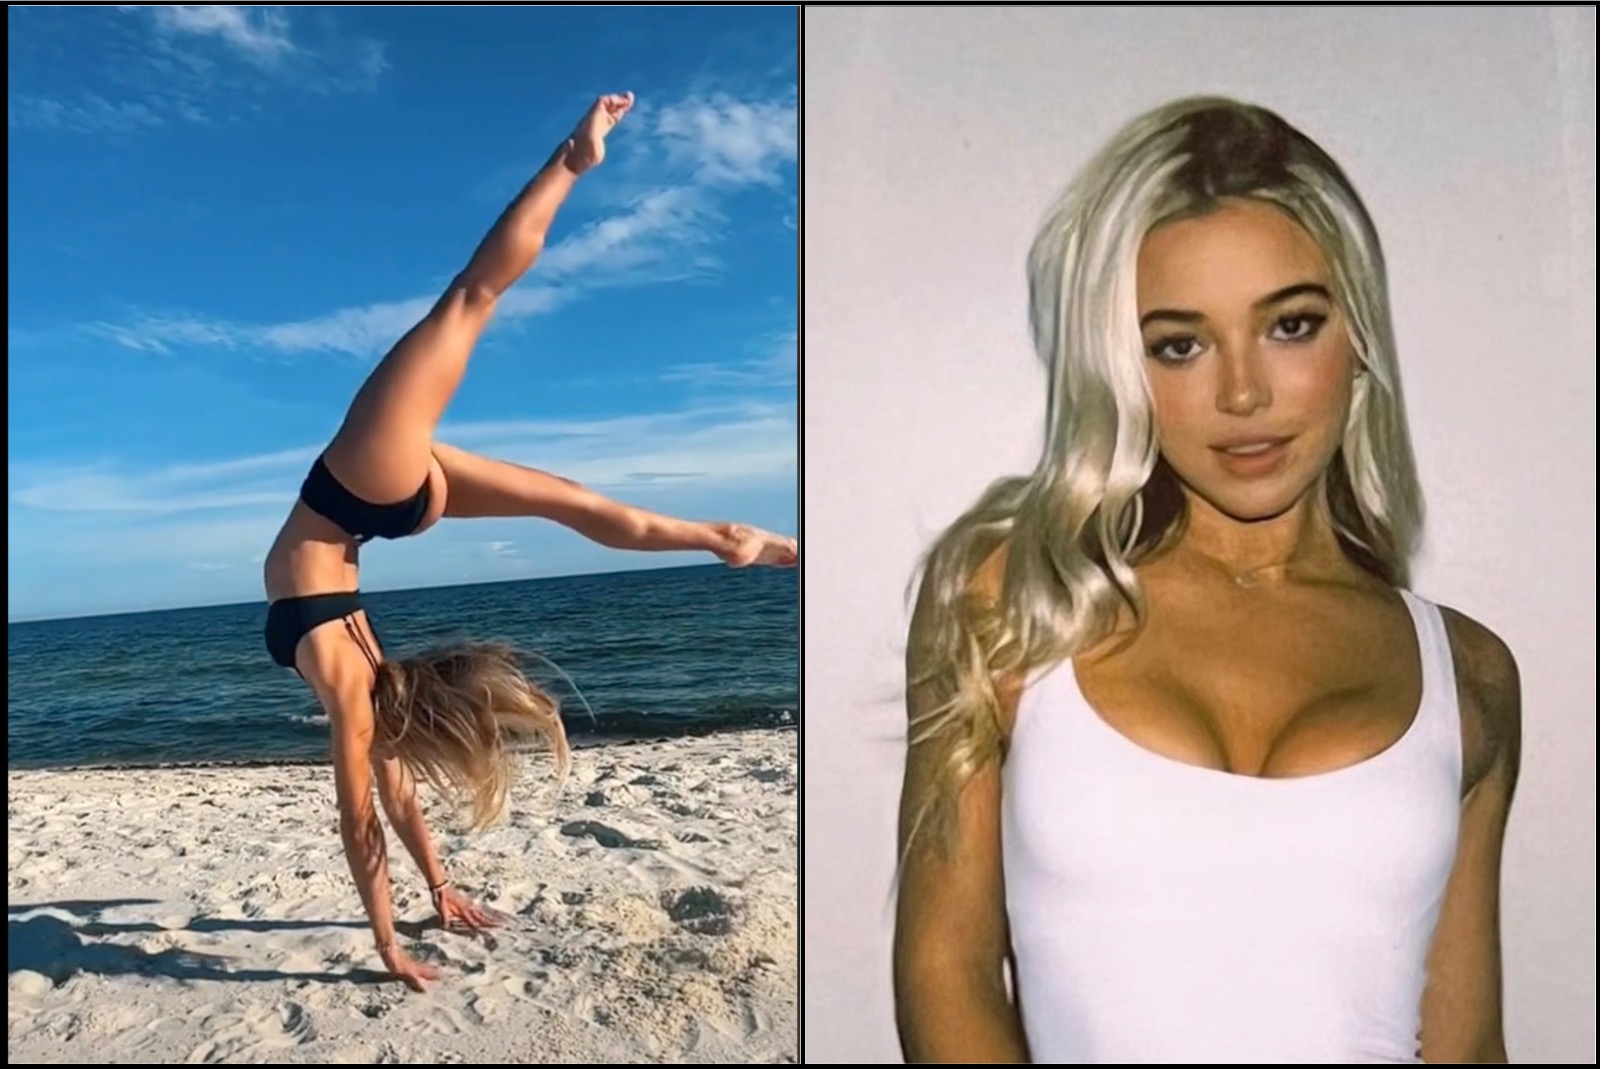 Lsu S Olivia Dunne Goes Viral Showing Off Thick Thighs And Booty In Beach Gymnastics Video In